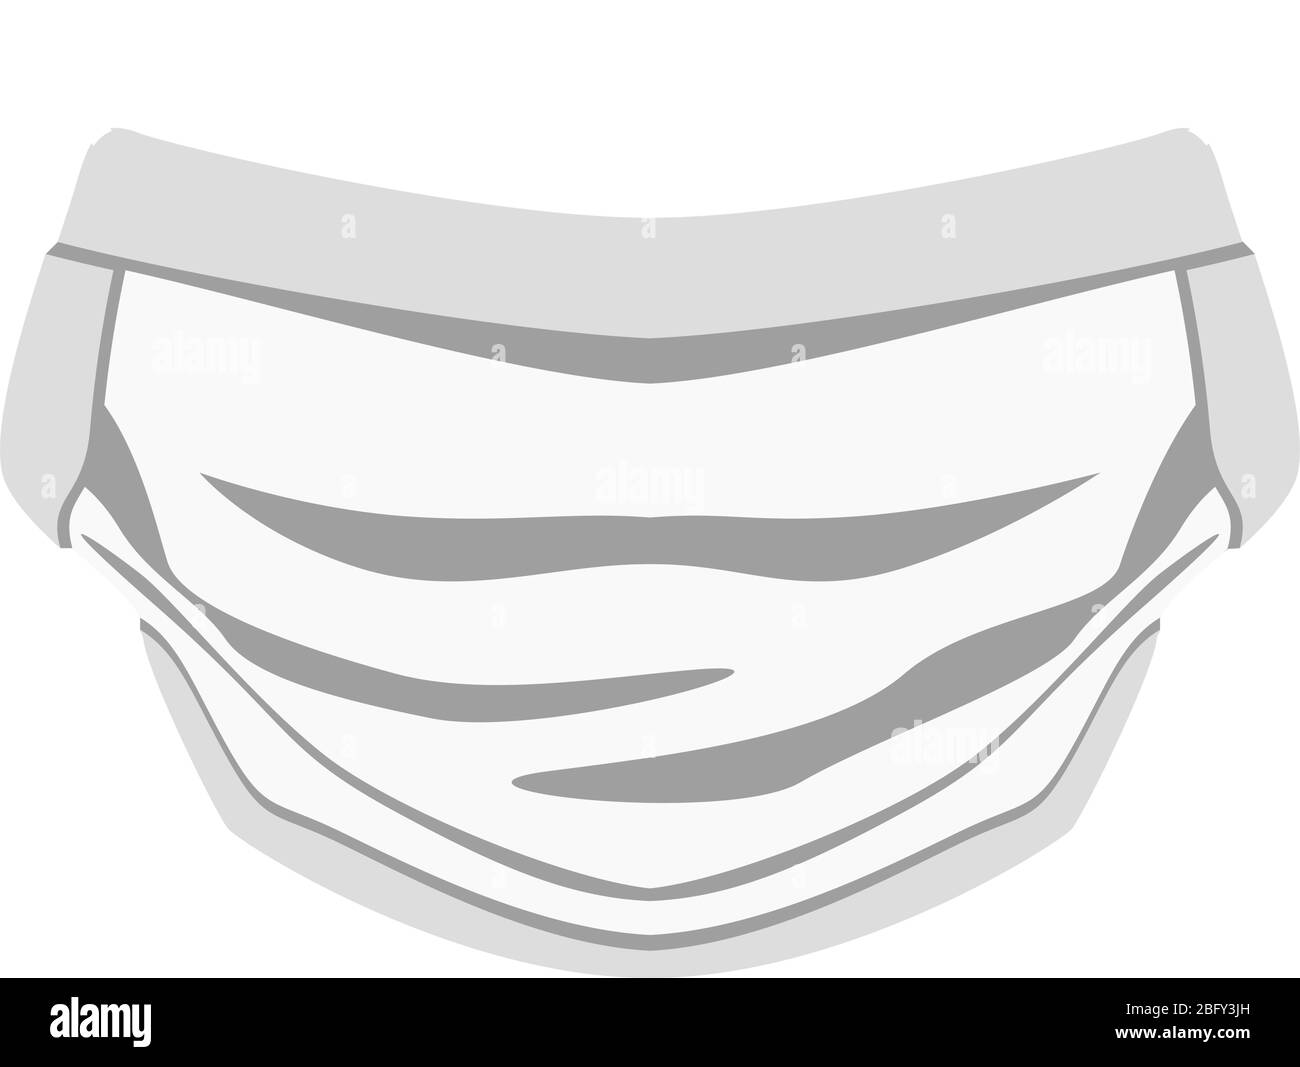 A graphic of a respirator used on construction sites or in hospitals. The mask keeps out all viruses, bacteria and pollutants. Stock Vector